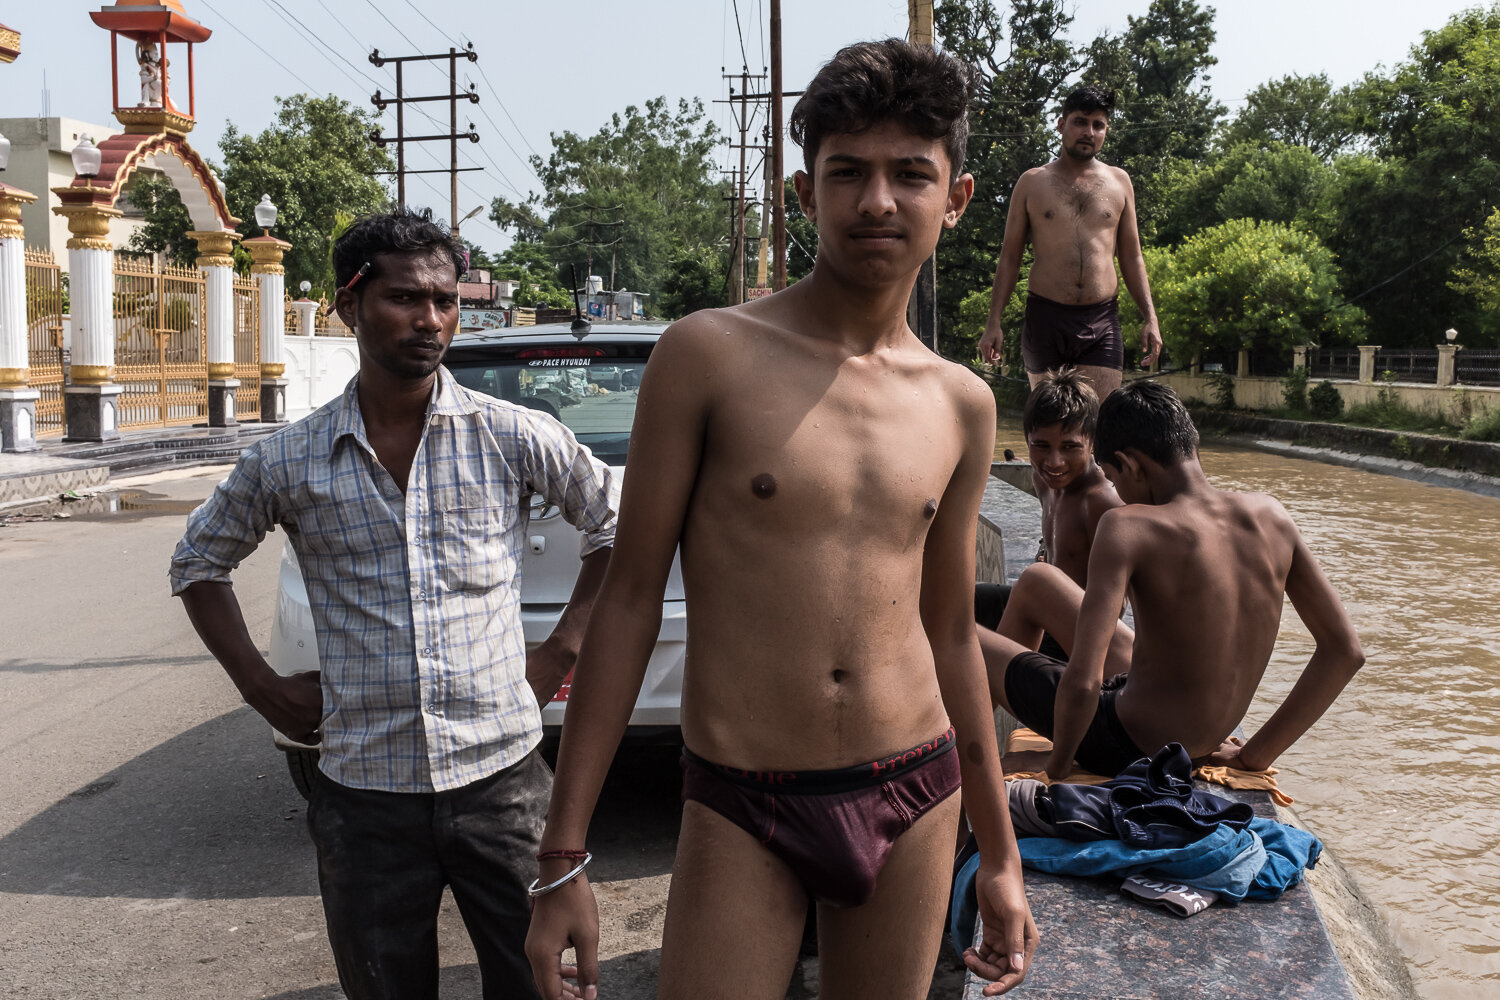  Boys cool off in the cold water of a canal fed by the Chenab River on Thursday, August 10, 2017 in Jammu, Jammu & Kashmir, India. The Chenab is one of the tributaries of the Indus River, originating the glaciers of the Himalayas. 